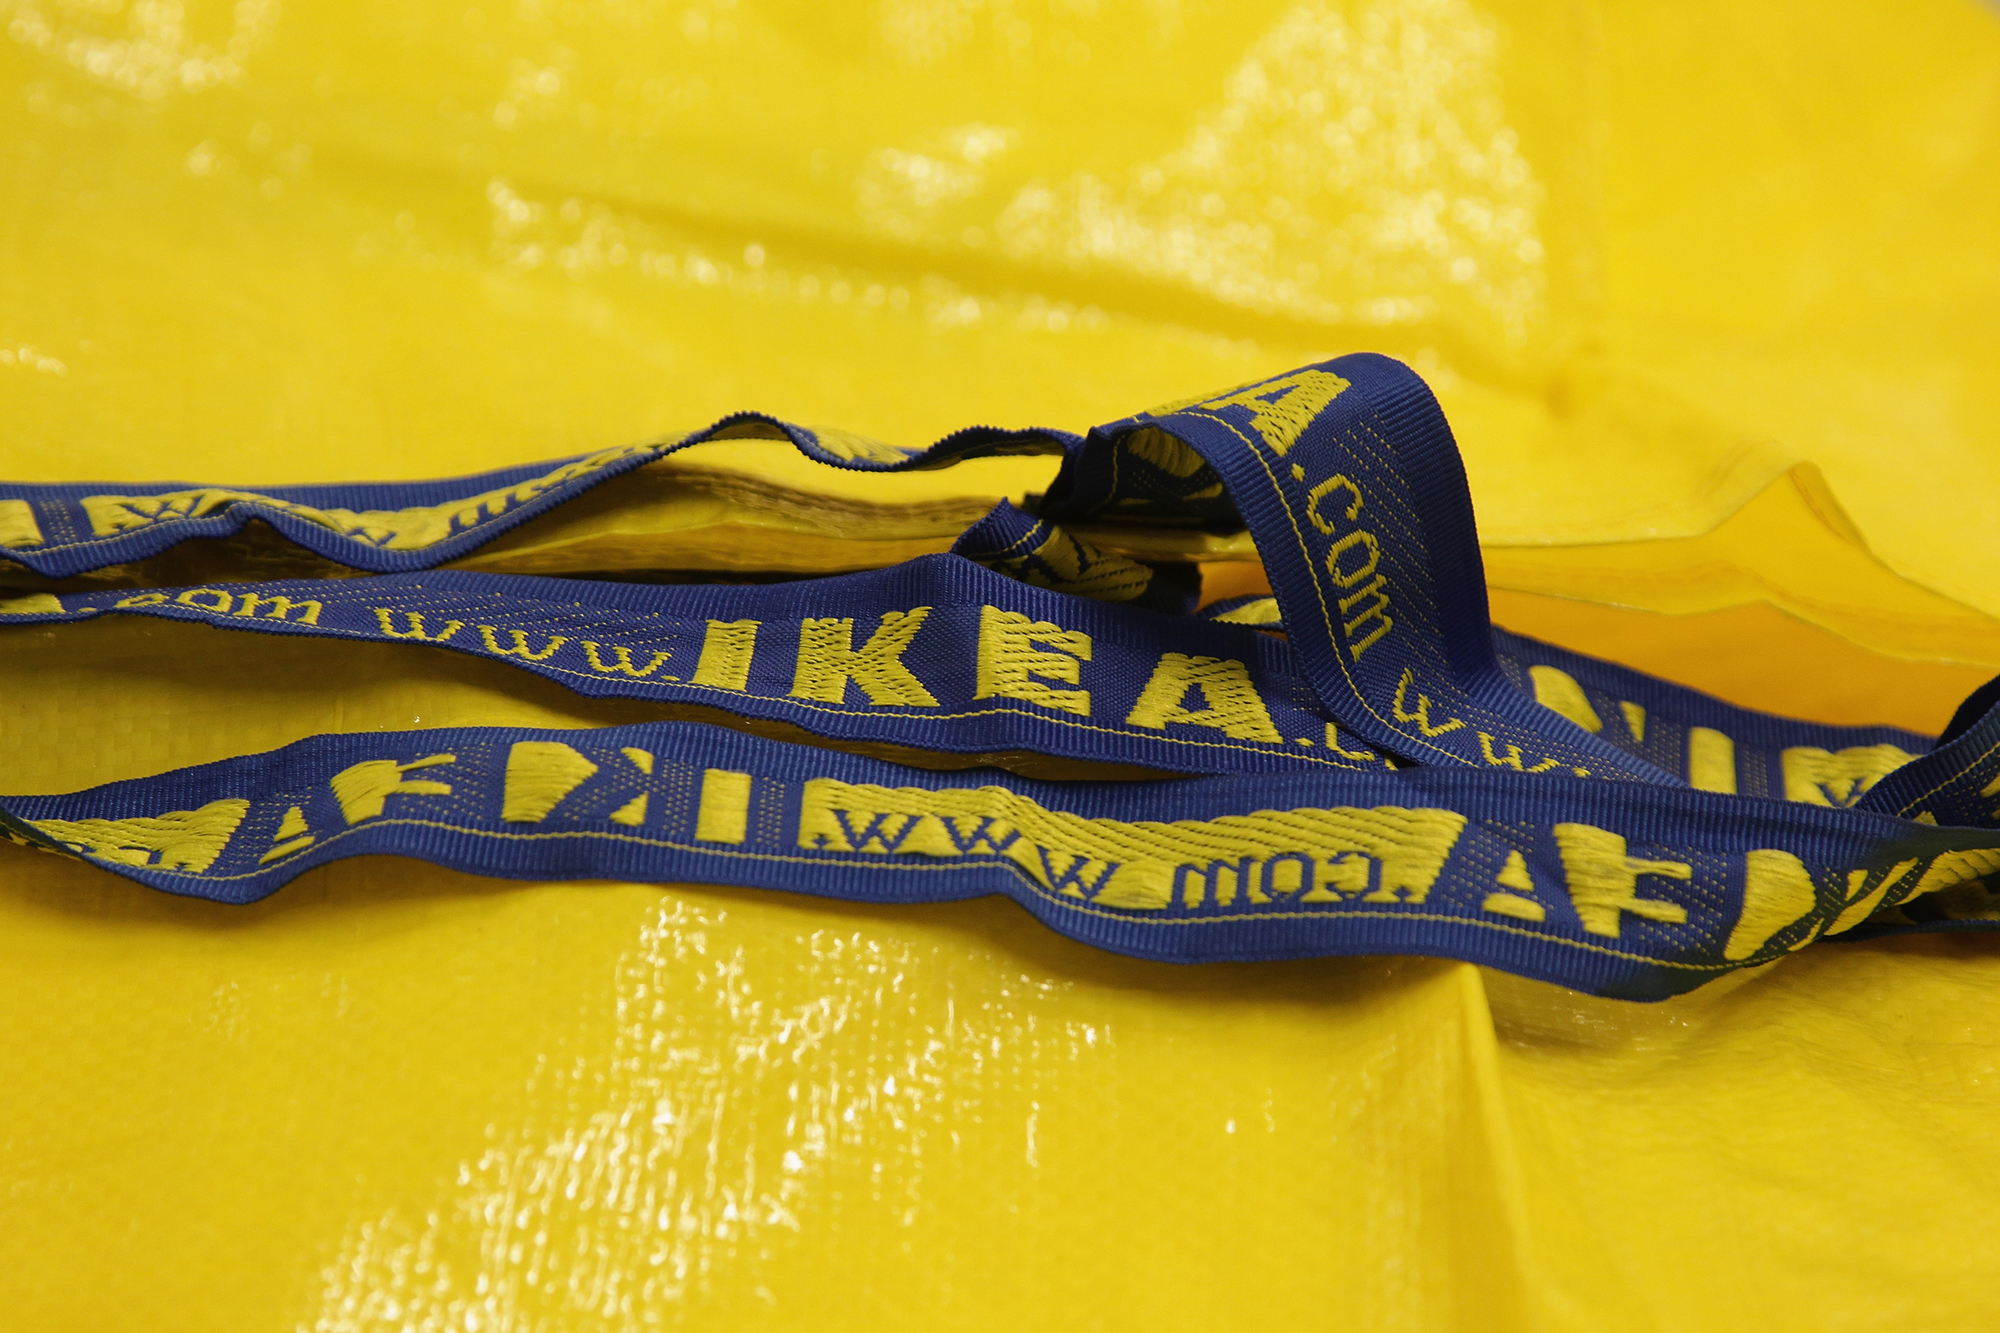 Virgil Abloh's IKEA Collection On Sale Date, Time